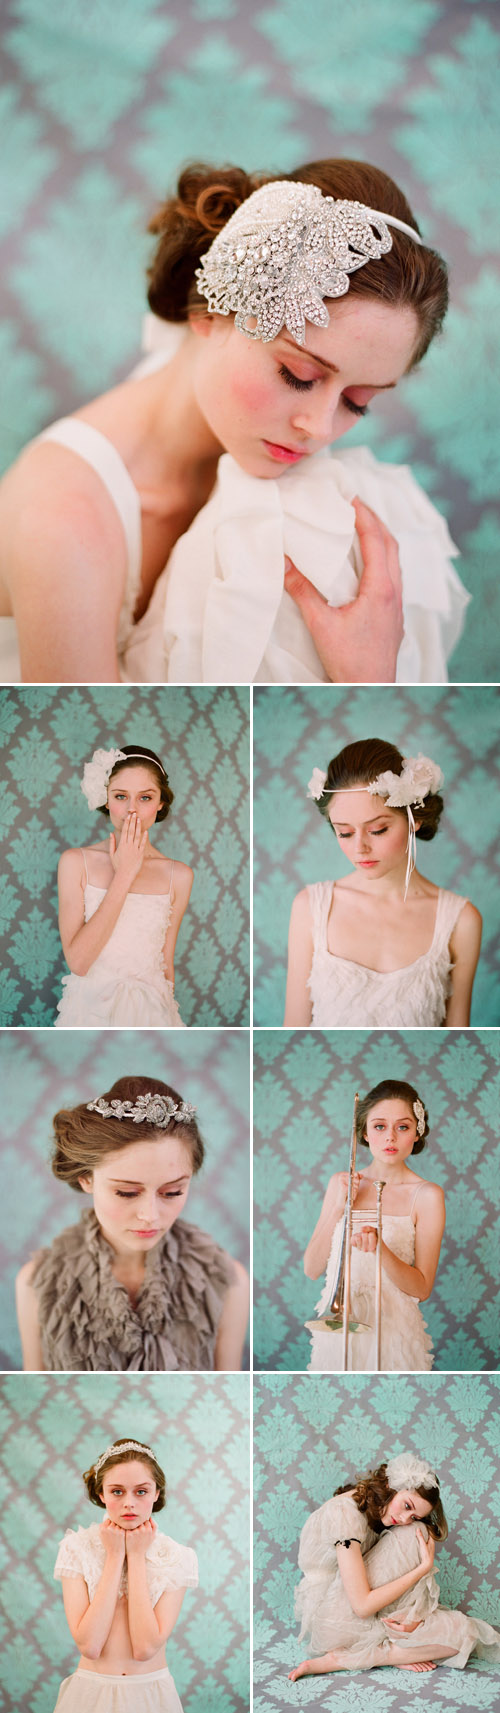 Twigs and Honey 2011 bridal accessory collection, photographed by Elizabeth Messina